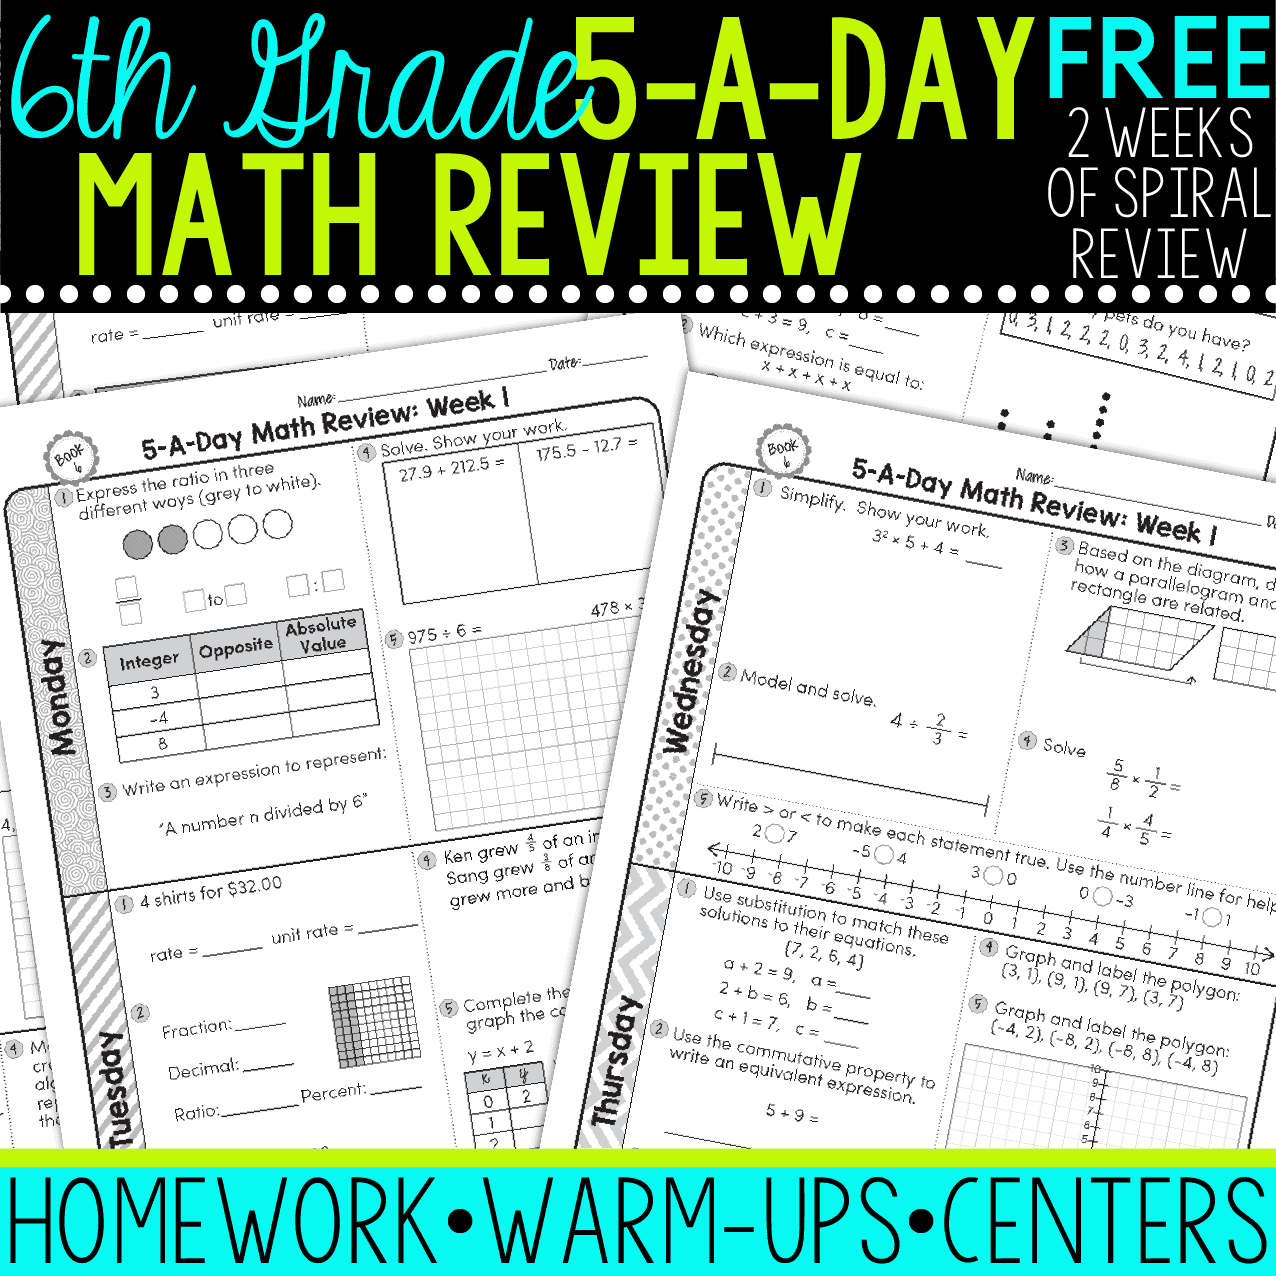 6th Grade daily math spiral review